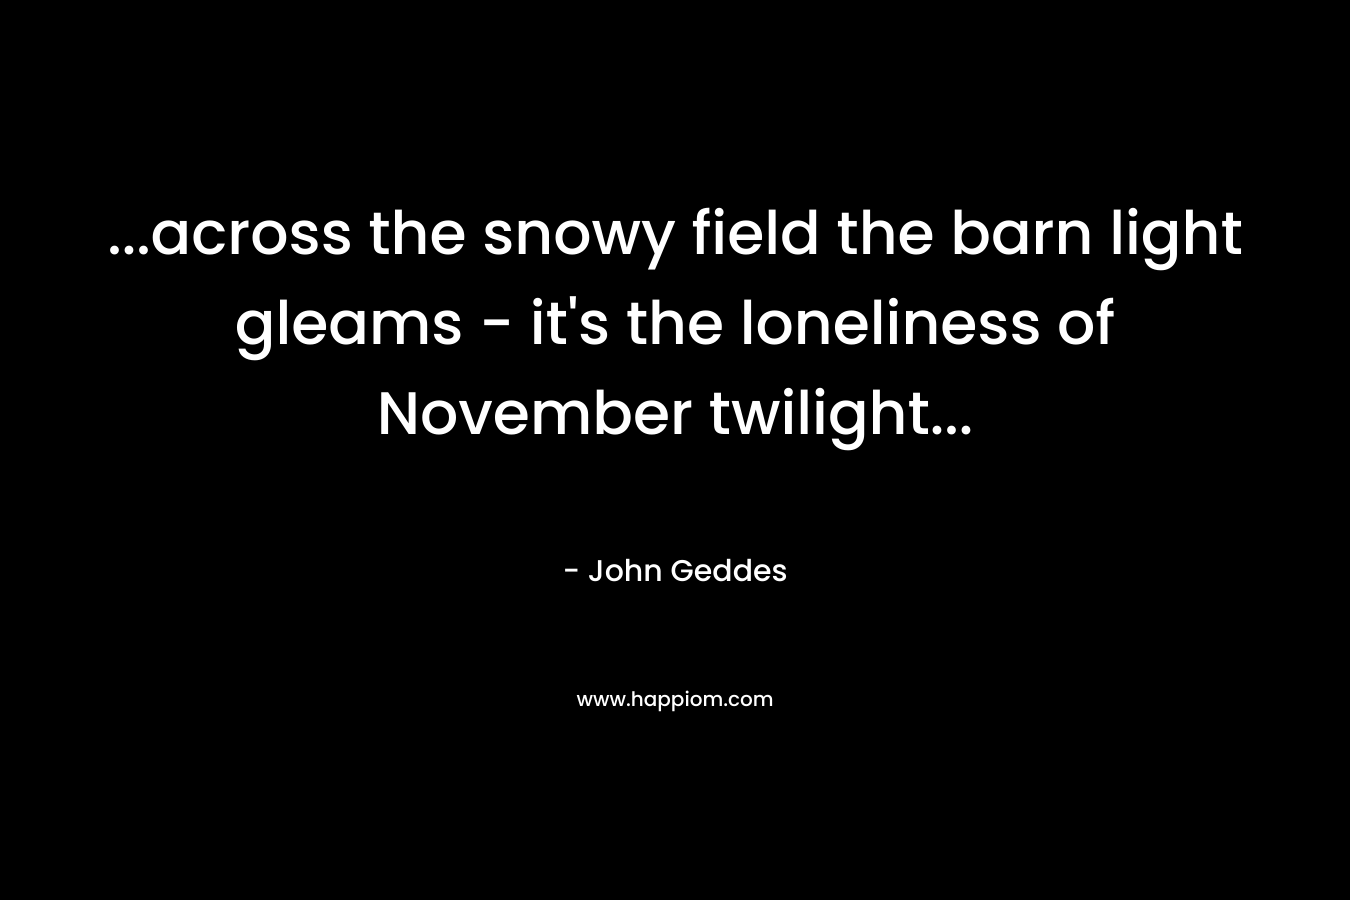 ...across the snowy field the barn light gleams - it's the loneliness of November twilight...